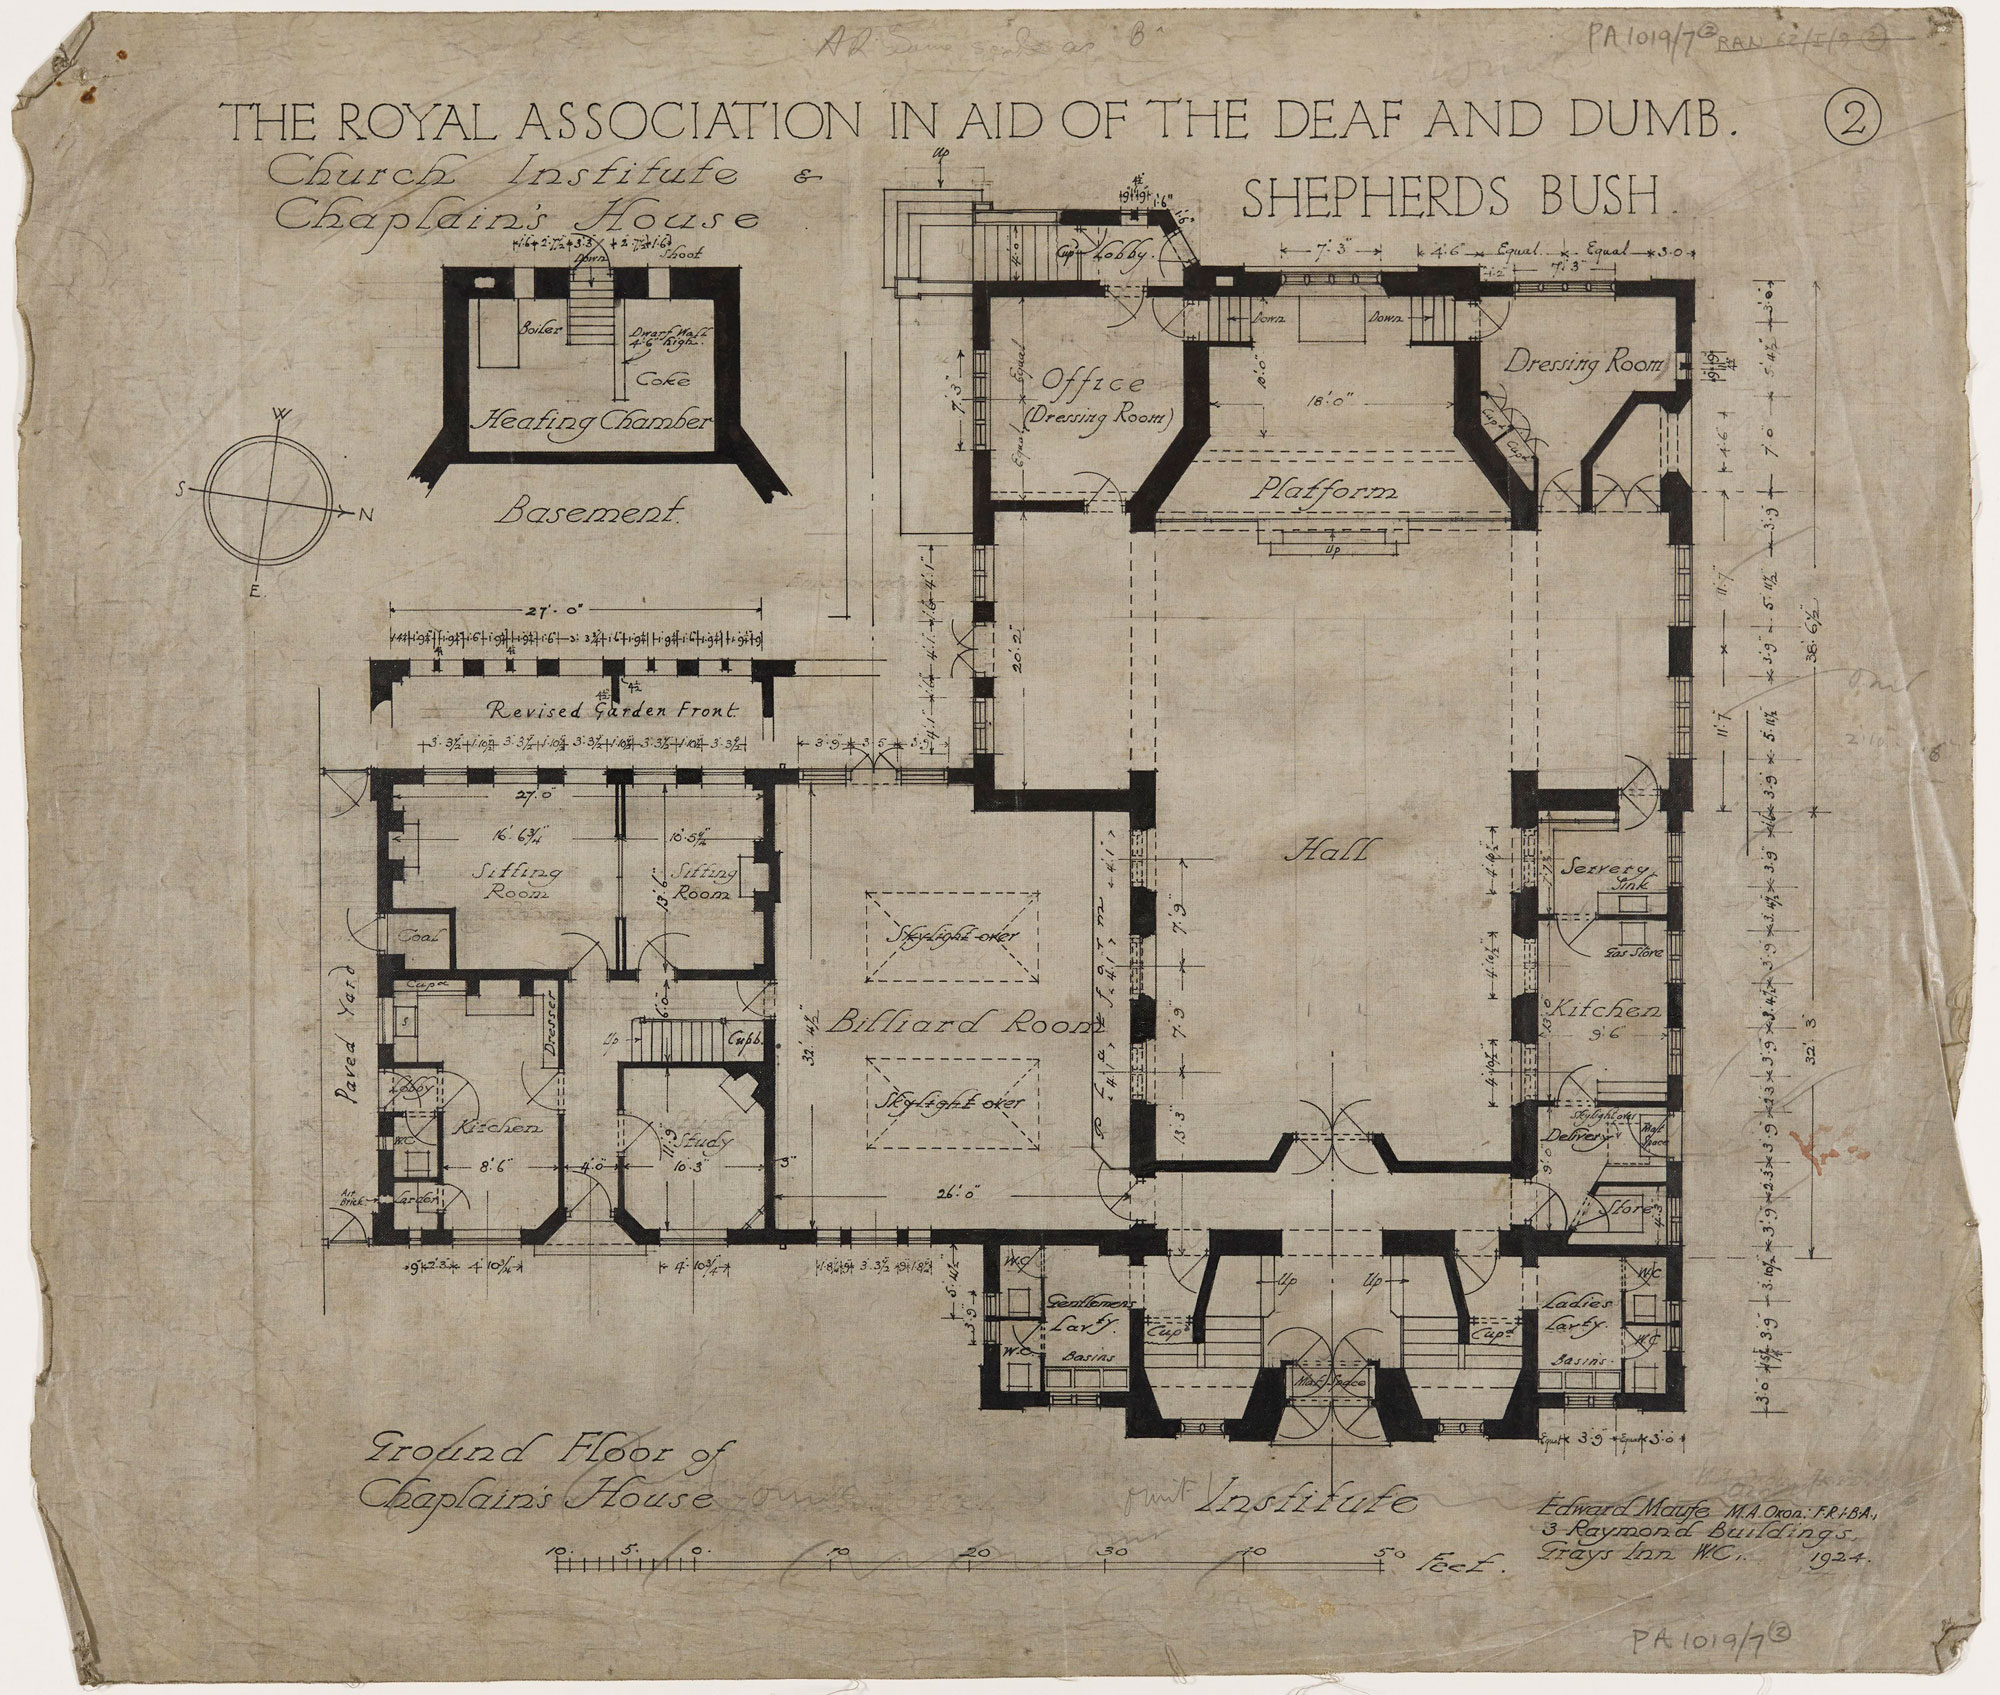 Architectural drawing of the floor plan of the church